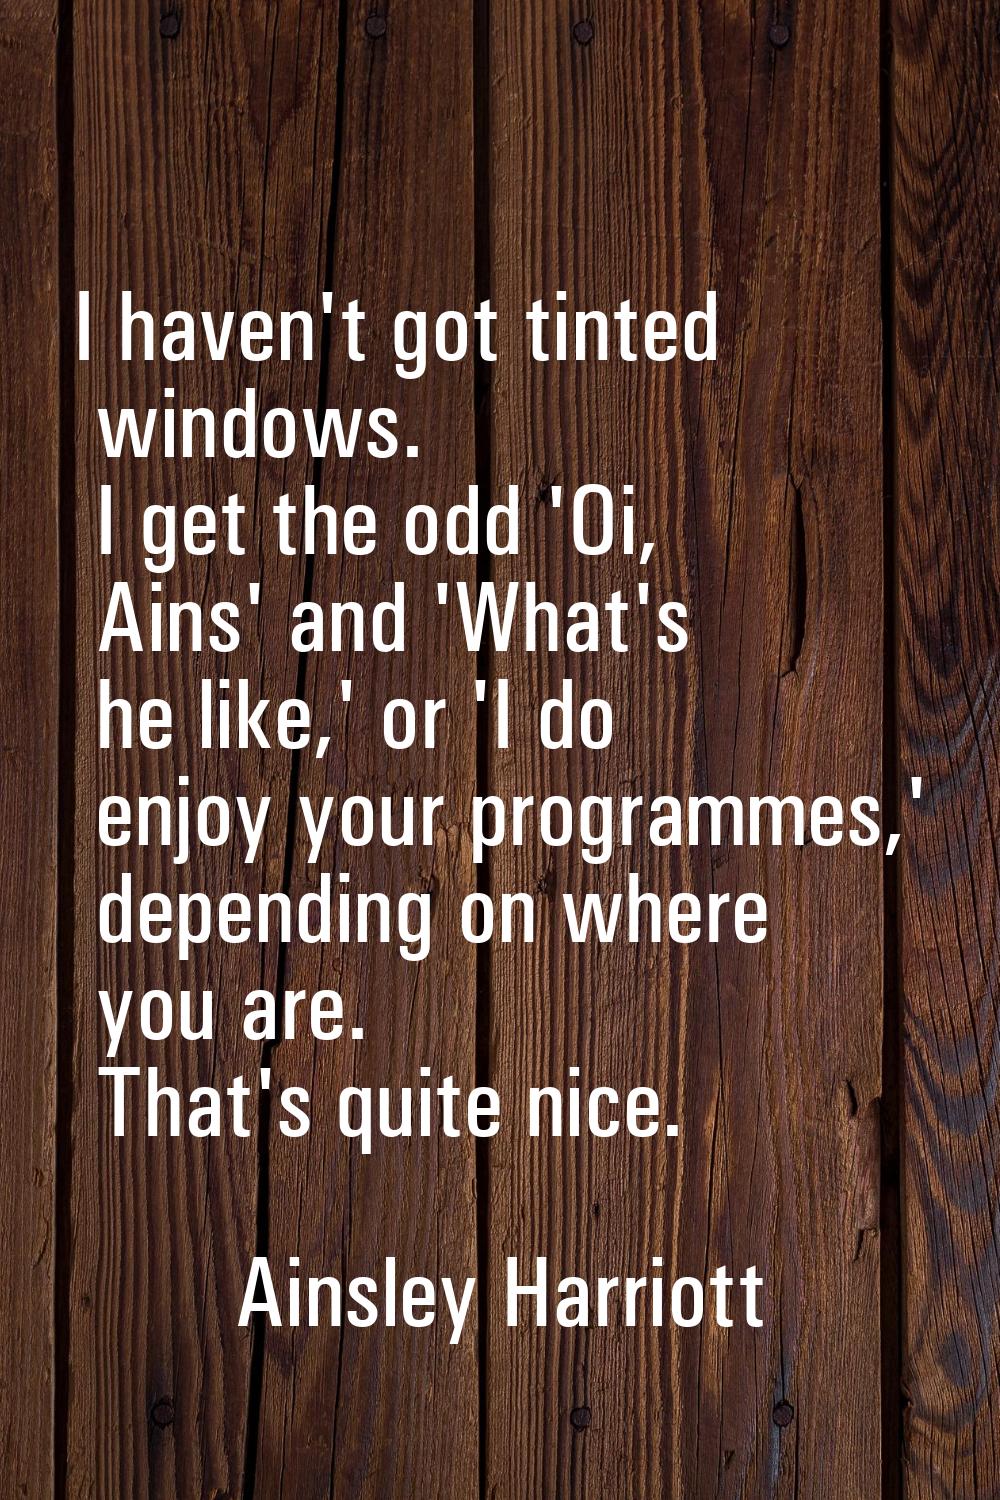 I haven't got tinted windows. I get the odd 'Oi, Ains' and 'What's he like,' or 'I do enjoy your pr